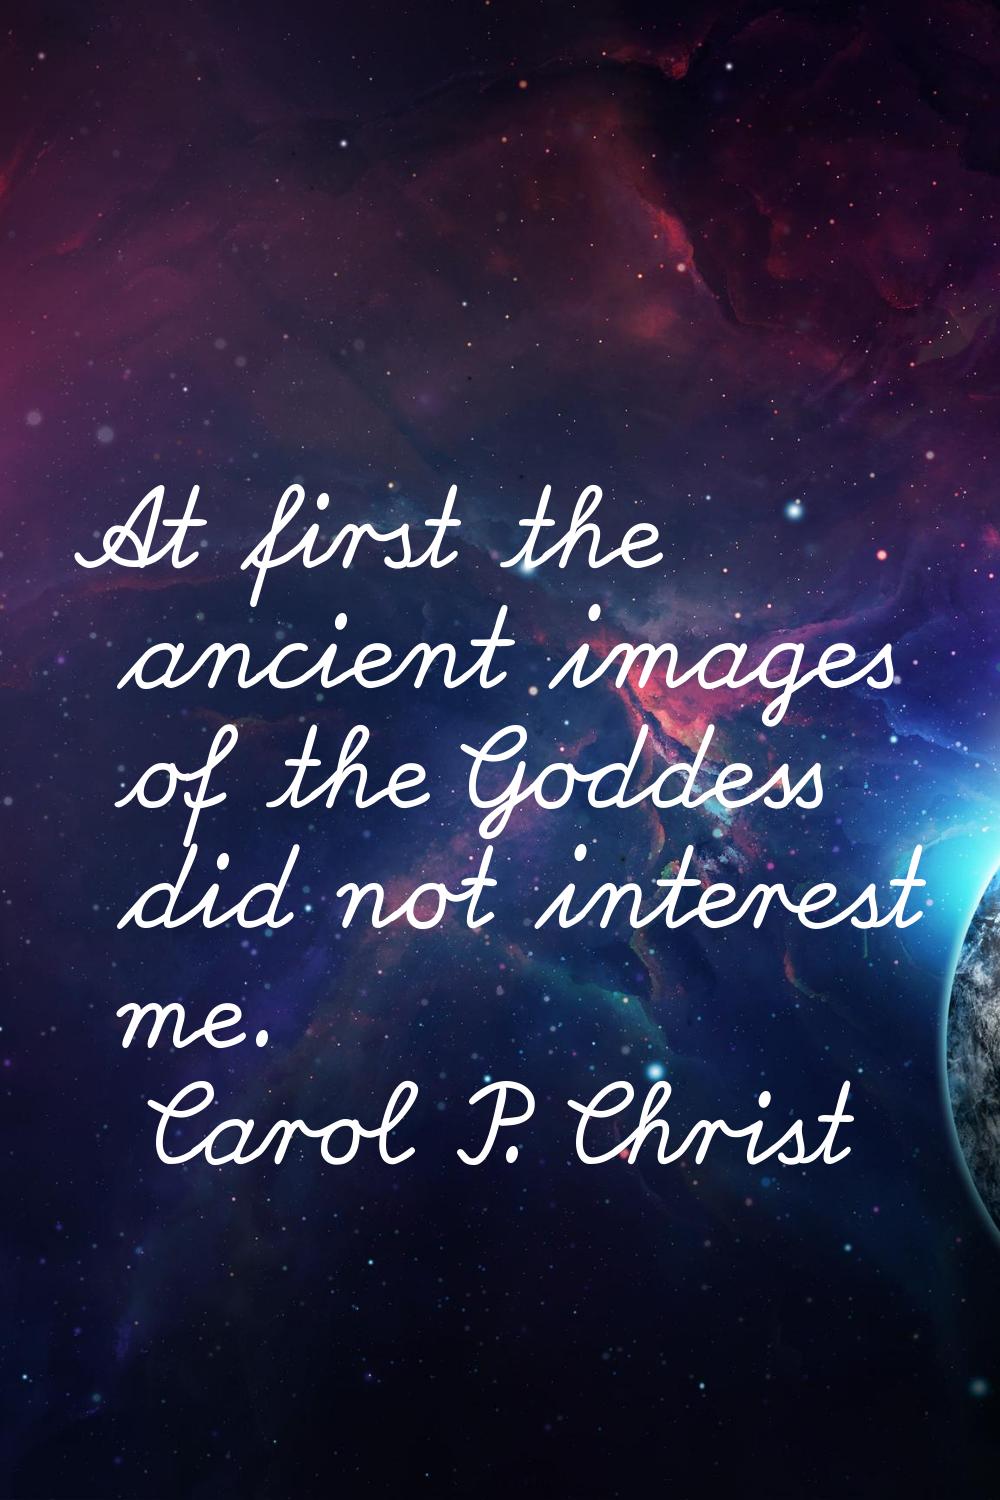 At first the ancient images of the Goddess did not interest me.